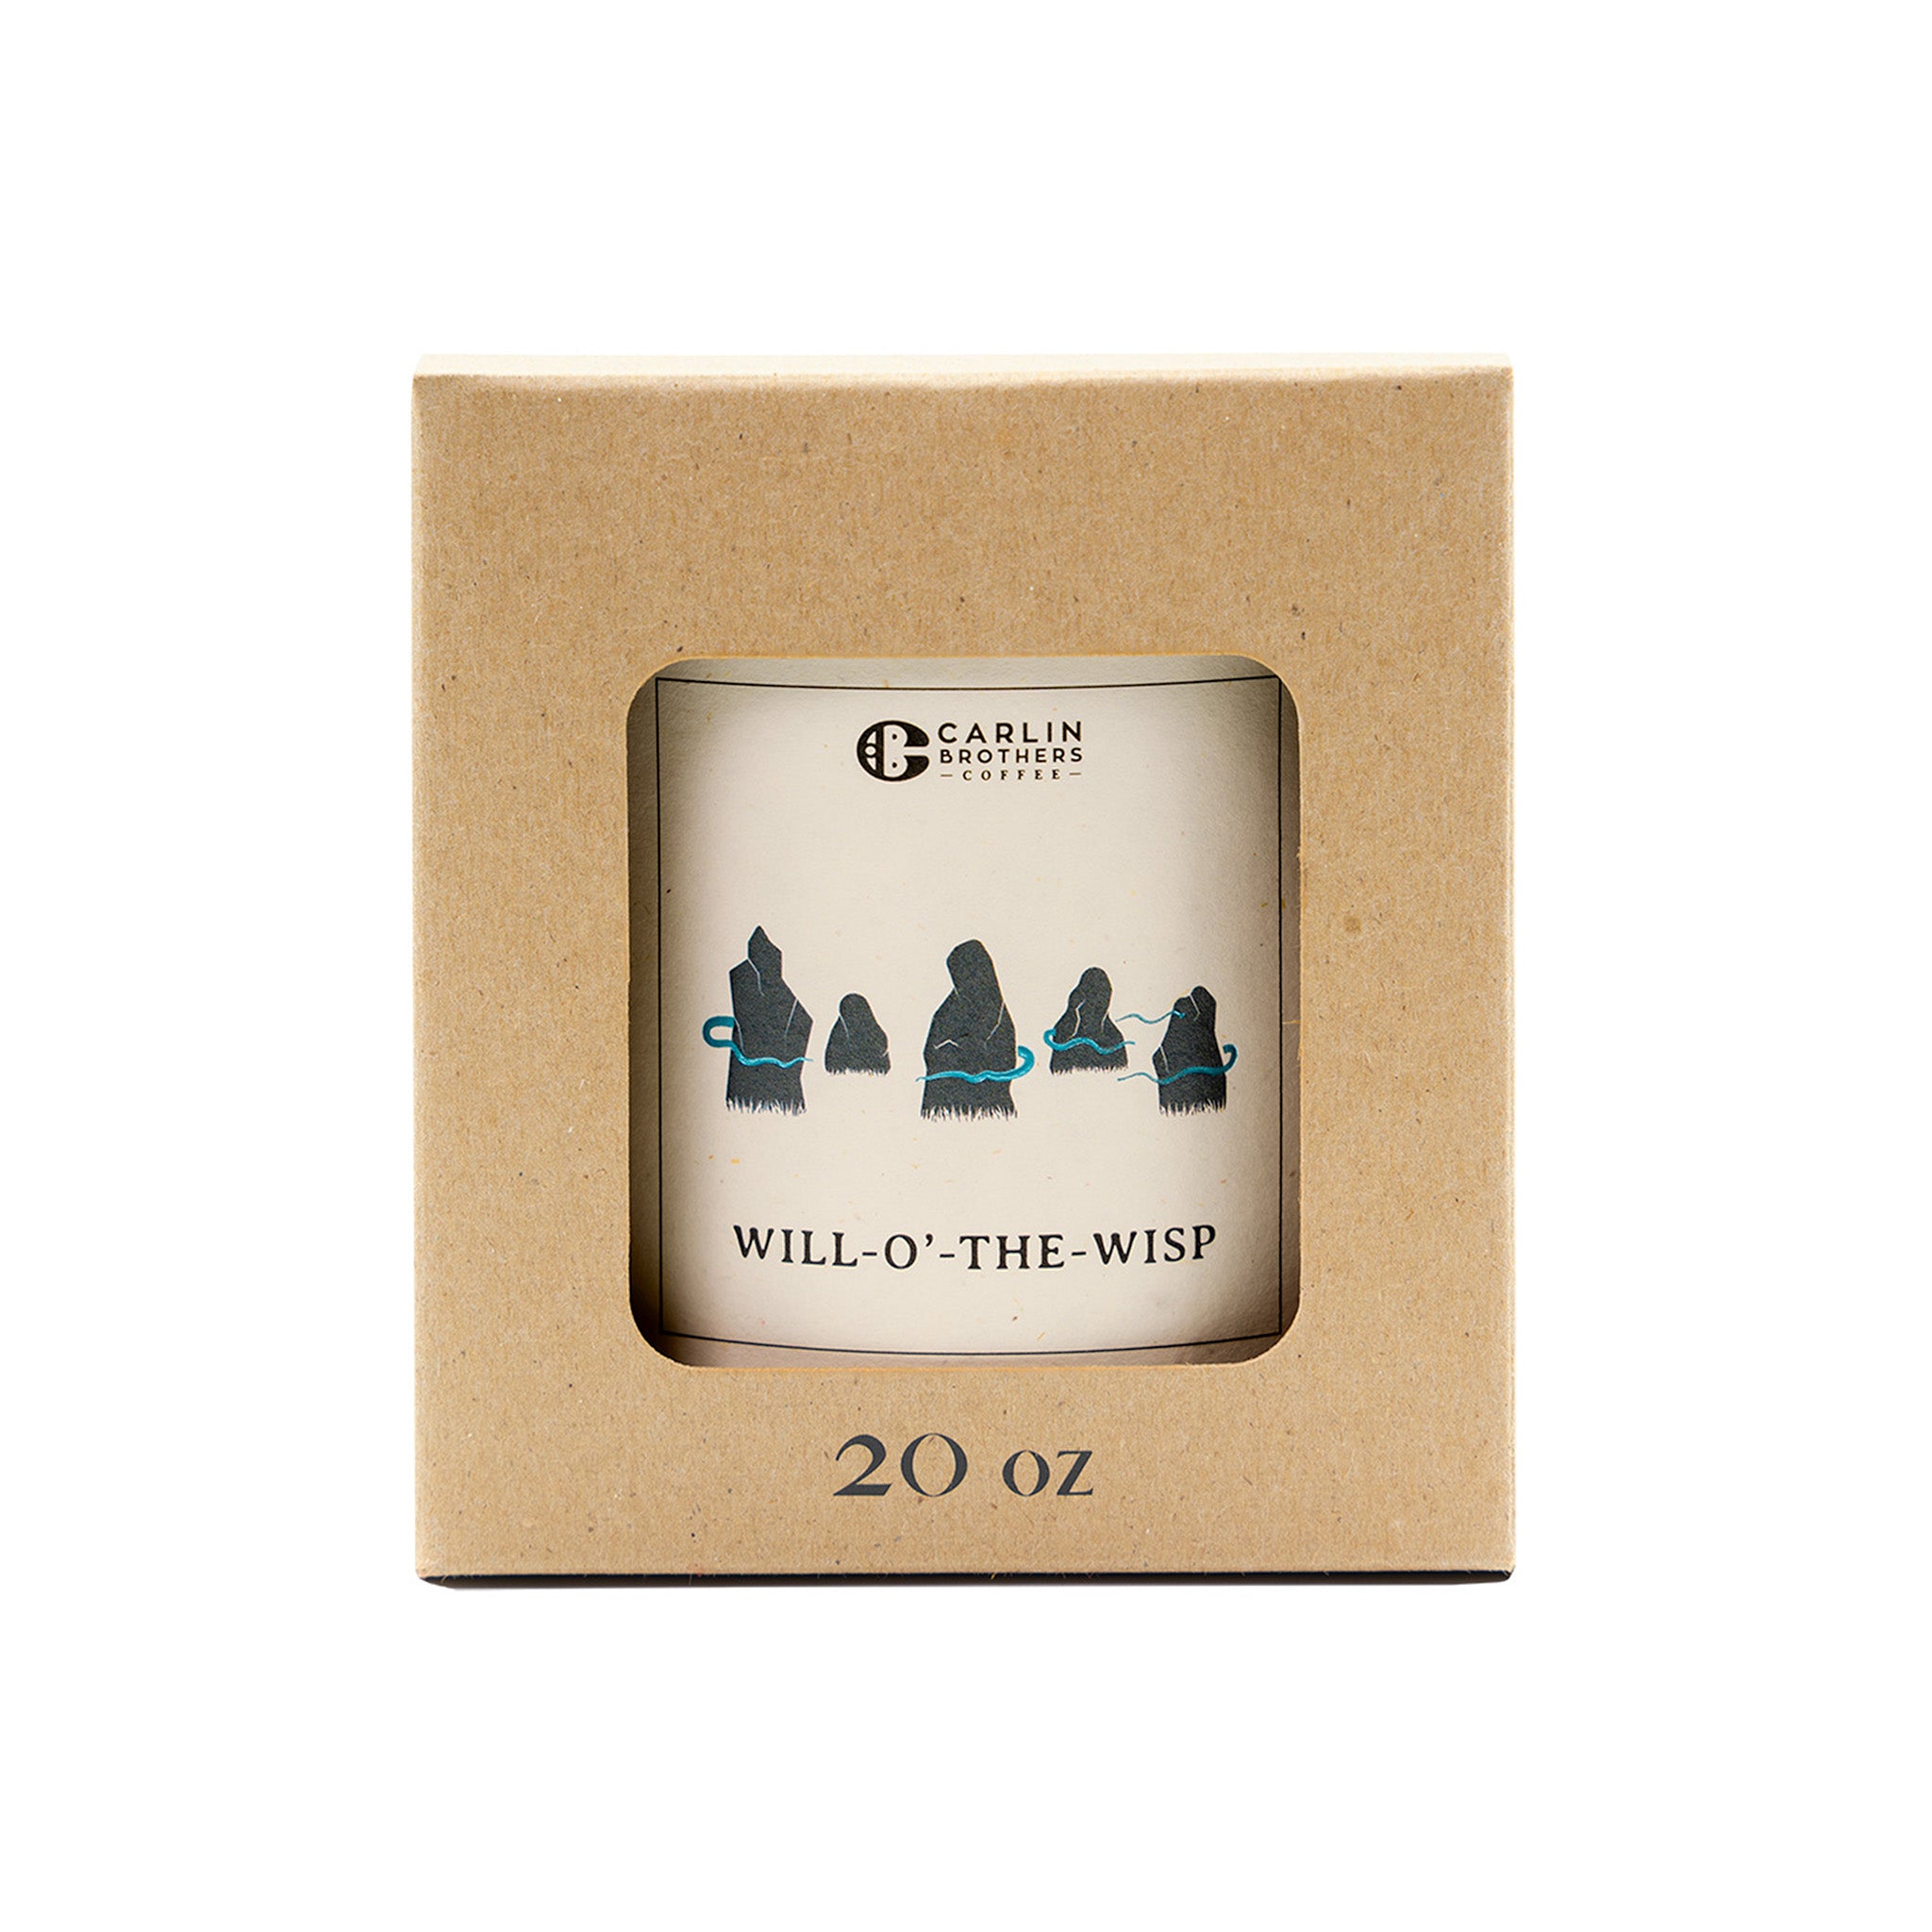 Super Carlin Brothers Mercantile Royal Candle Will-o'-the-wisp candle in box